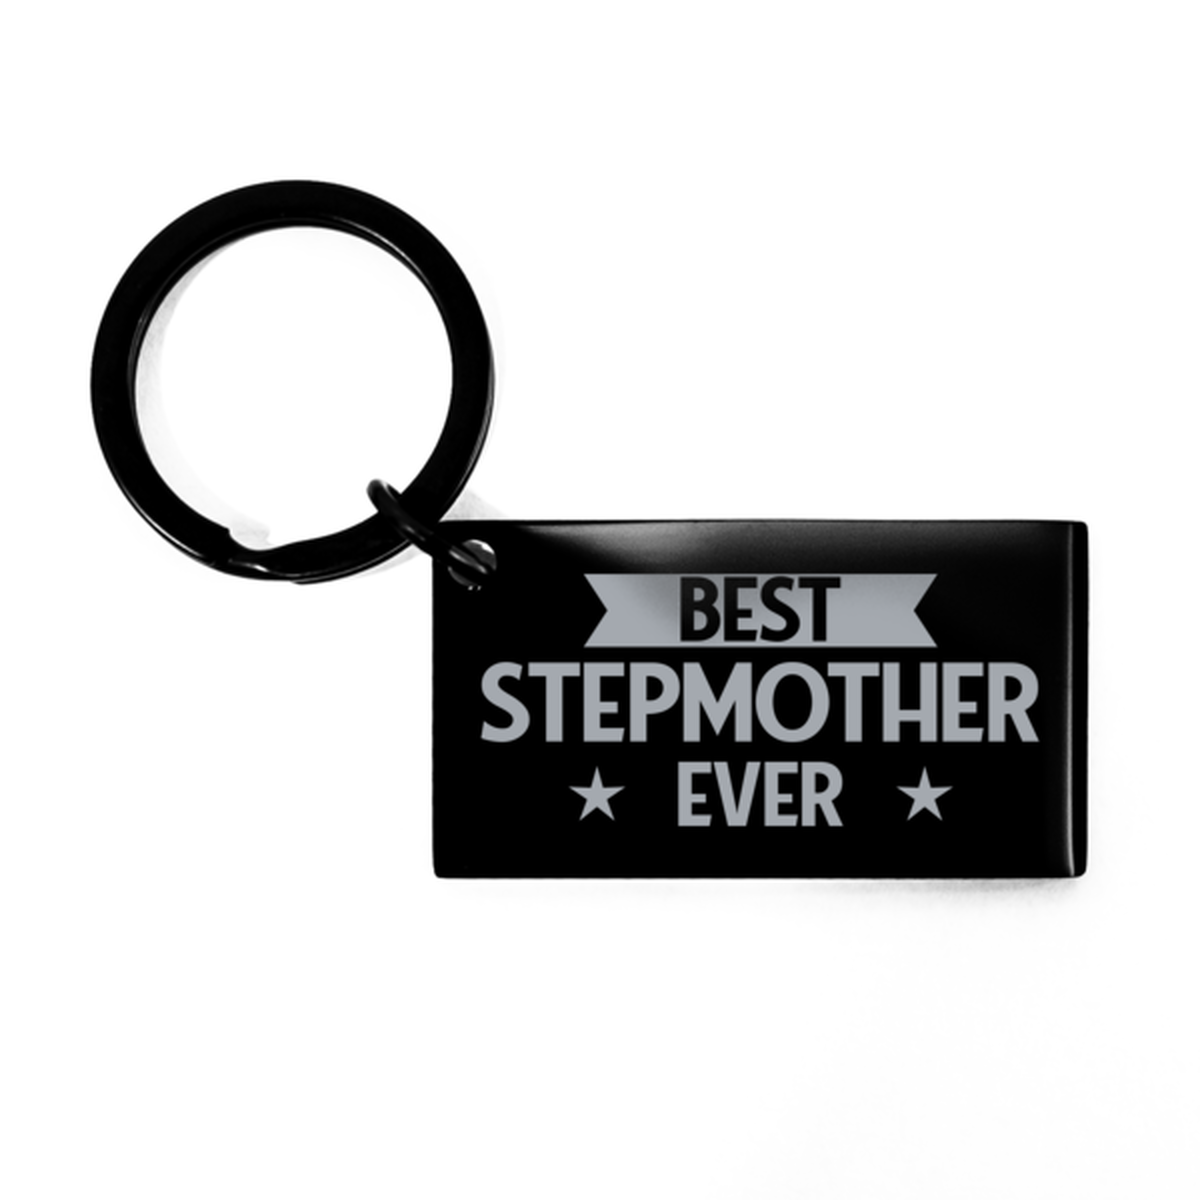 Best Stepmother Ever Stepmother Gifts, Funny Black Keychain For Stepmother, Birthday Engraved Keyring Presents For Women